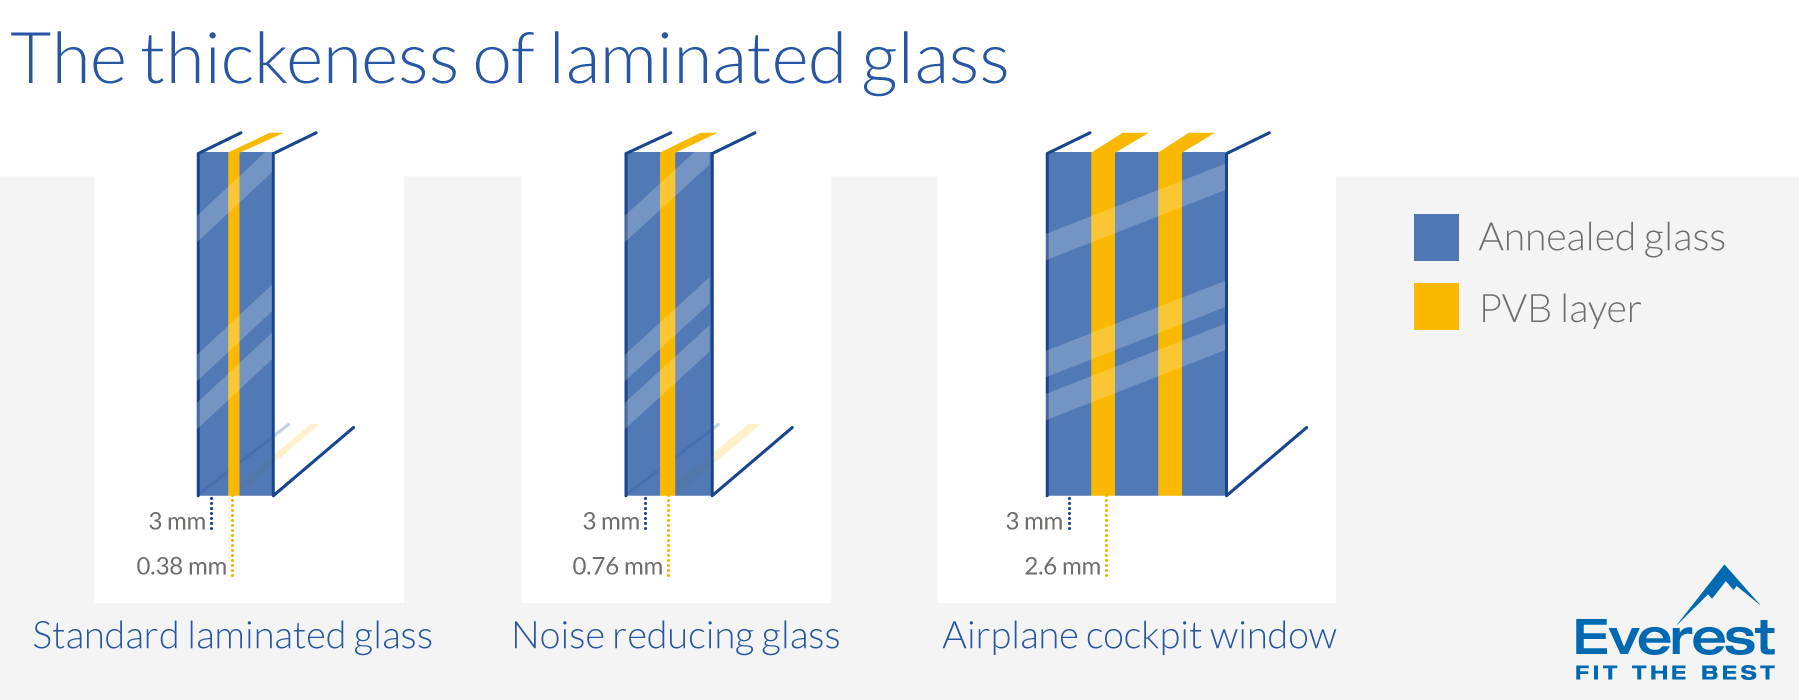 Thickness of laminated glass